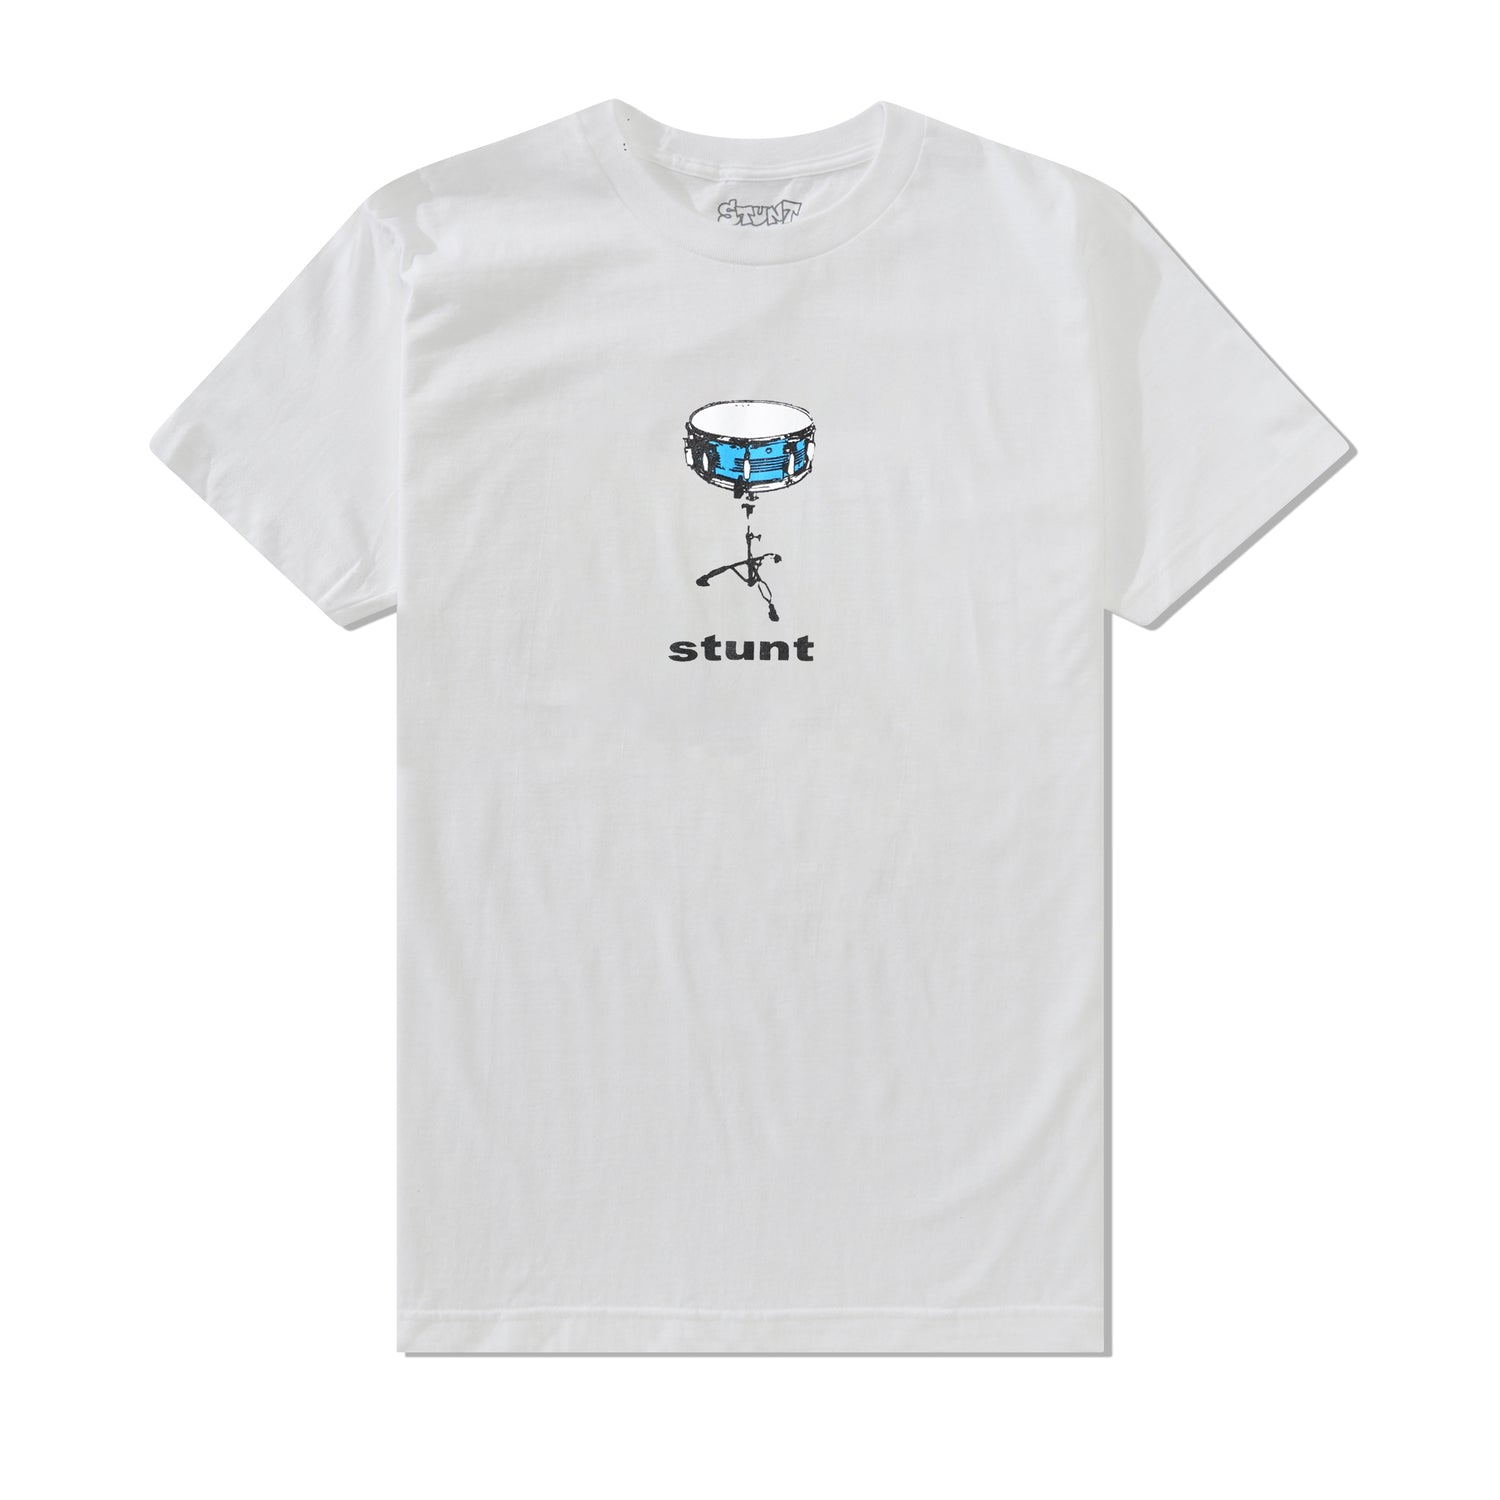 Snare Drum Tee, White